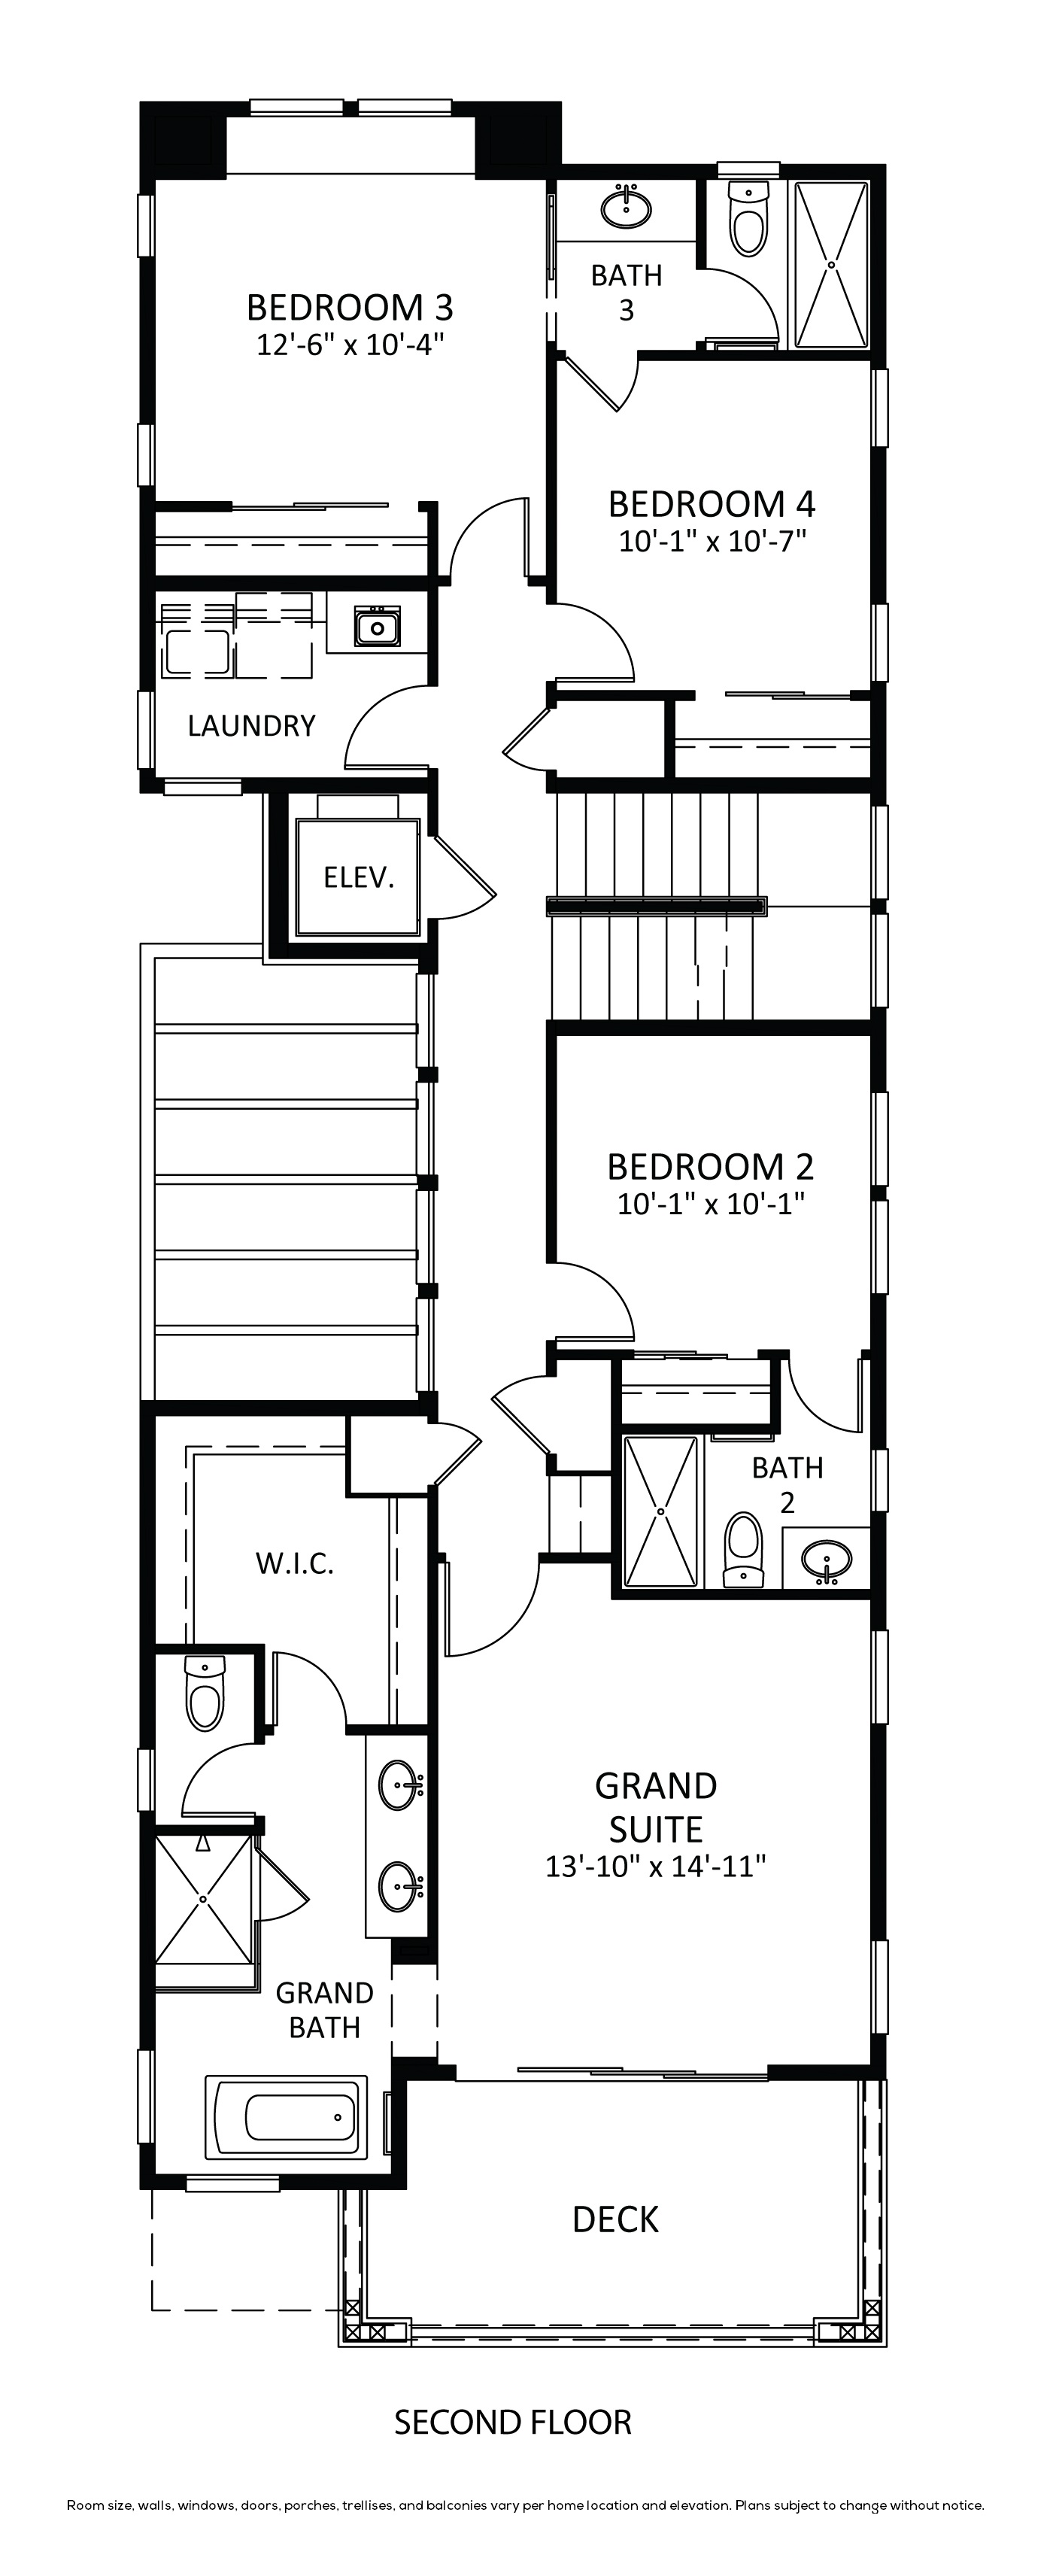 Floorplan 02. 225 Coral Ave.jpg for 225 Coral Avenue